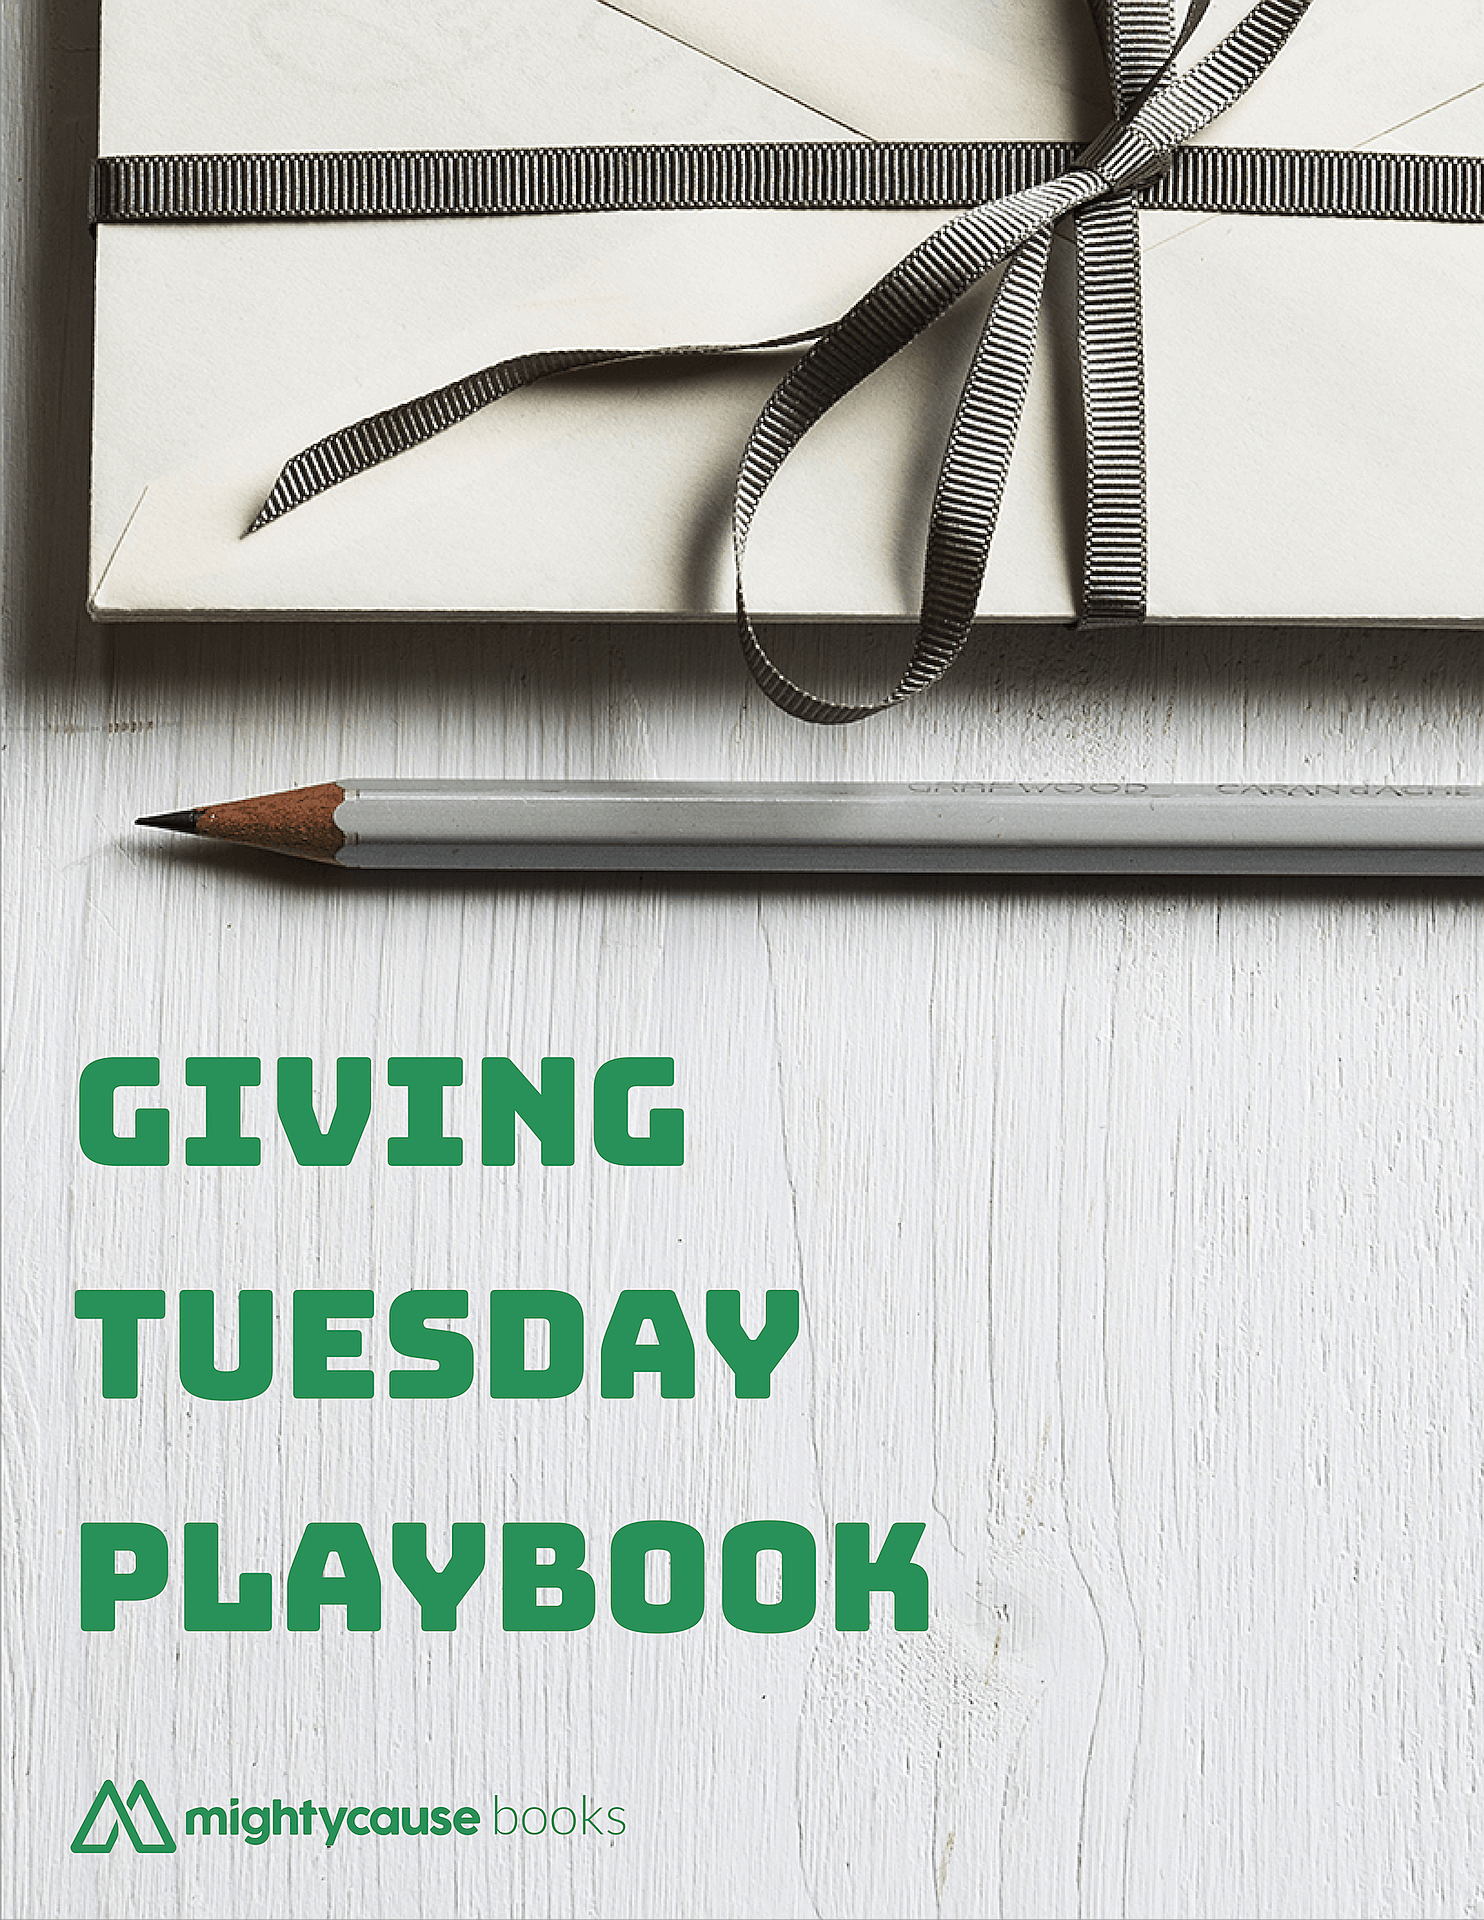 The Complete Giving Tuesday Toolkit for Nonprofits